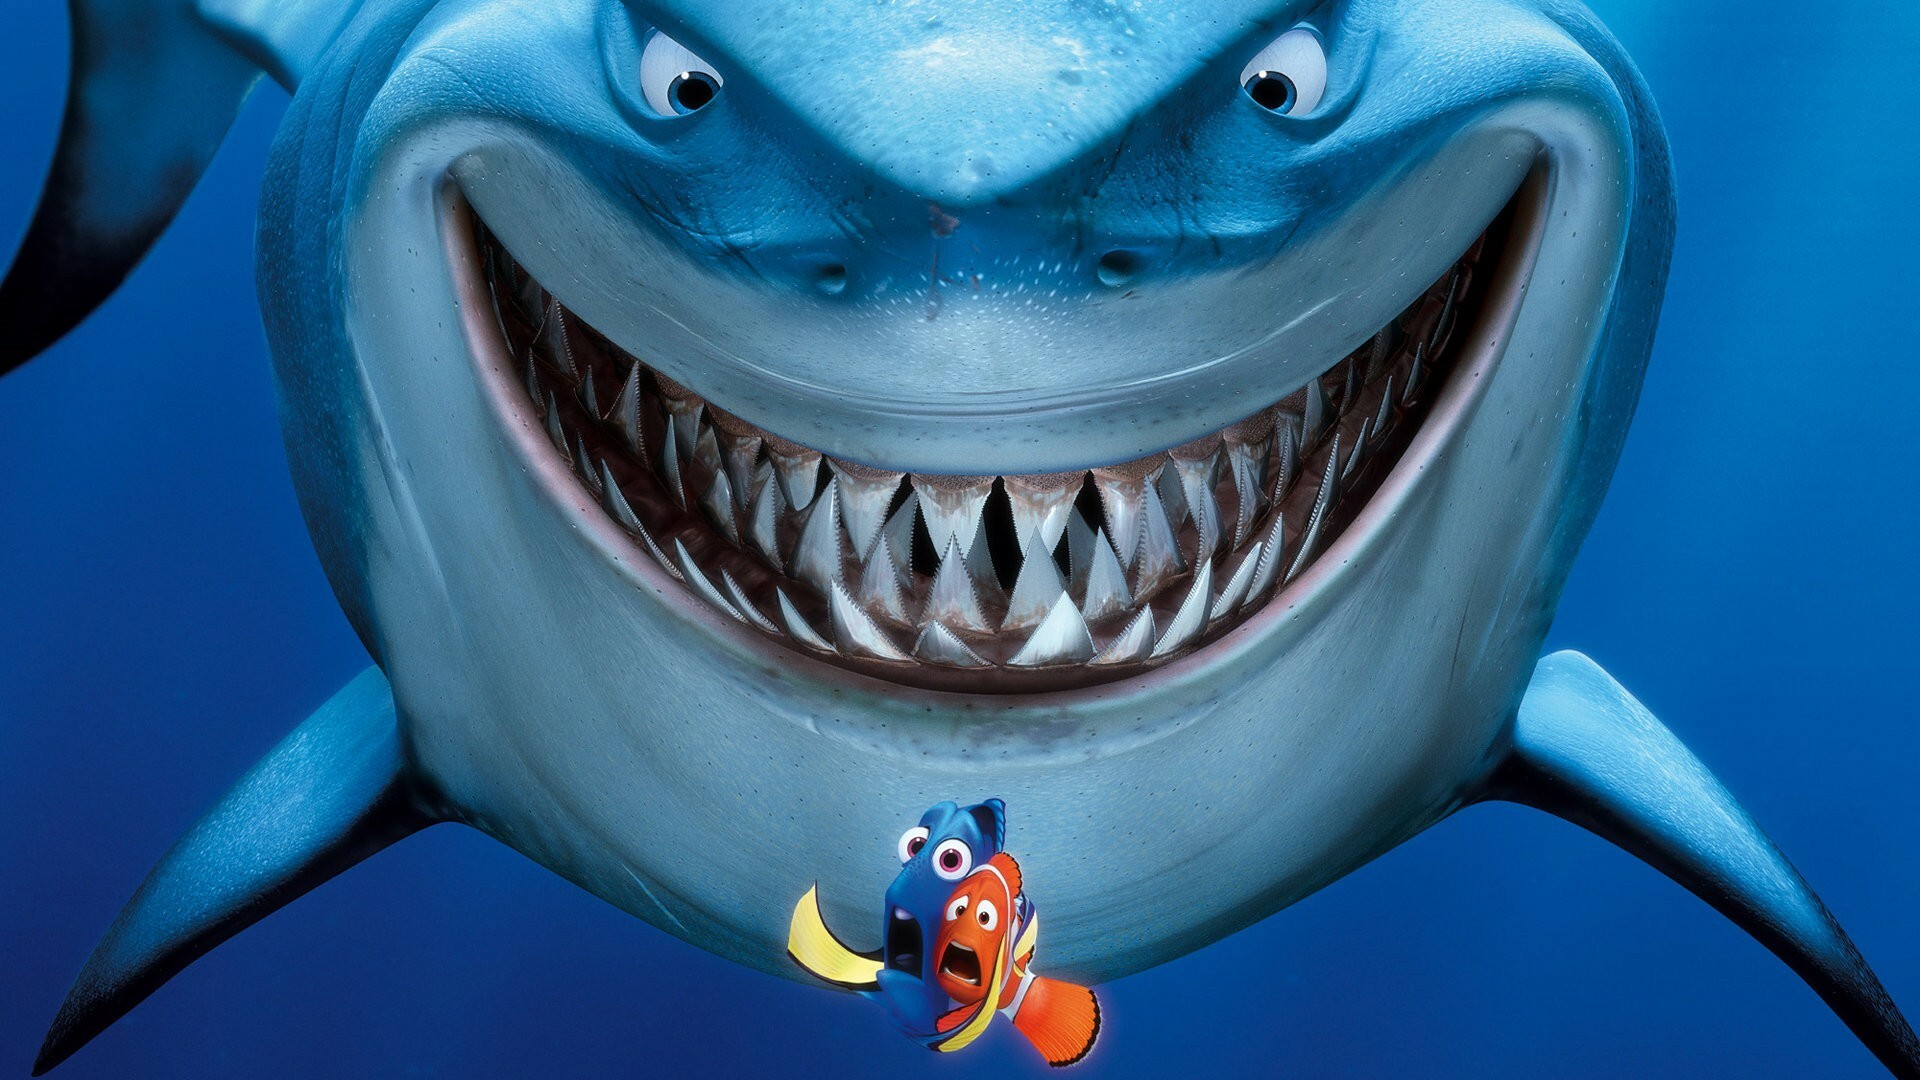 Finding Nemo: Bruce, The leader of the Fish-Friendly Sharks support group. 1920x1080 Full HD Wallpaper.